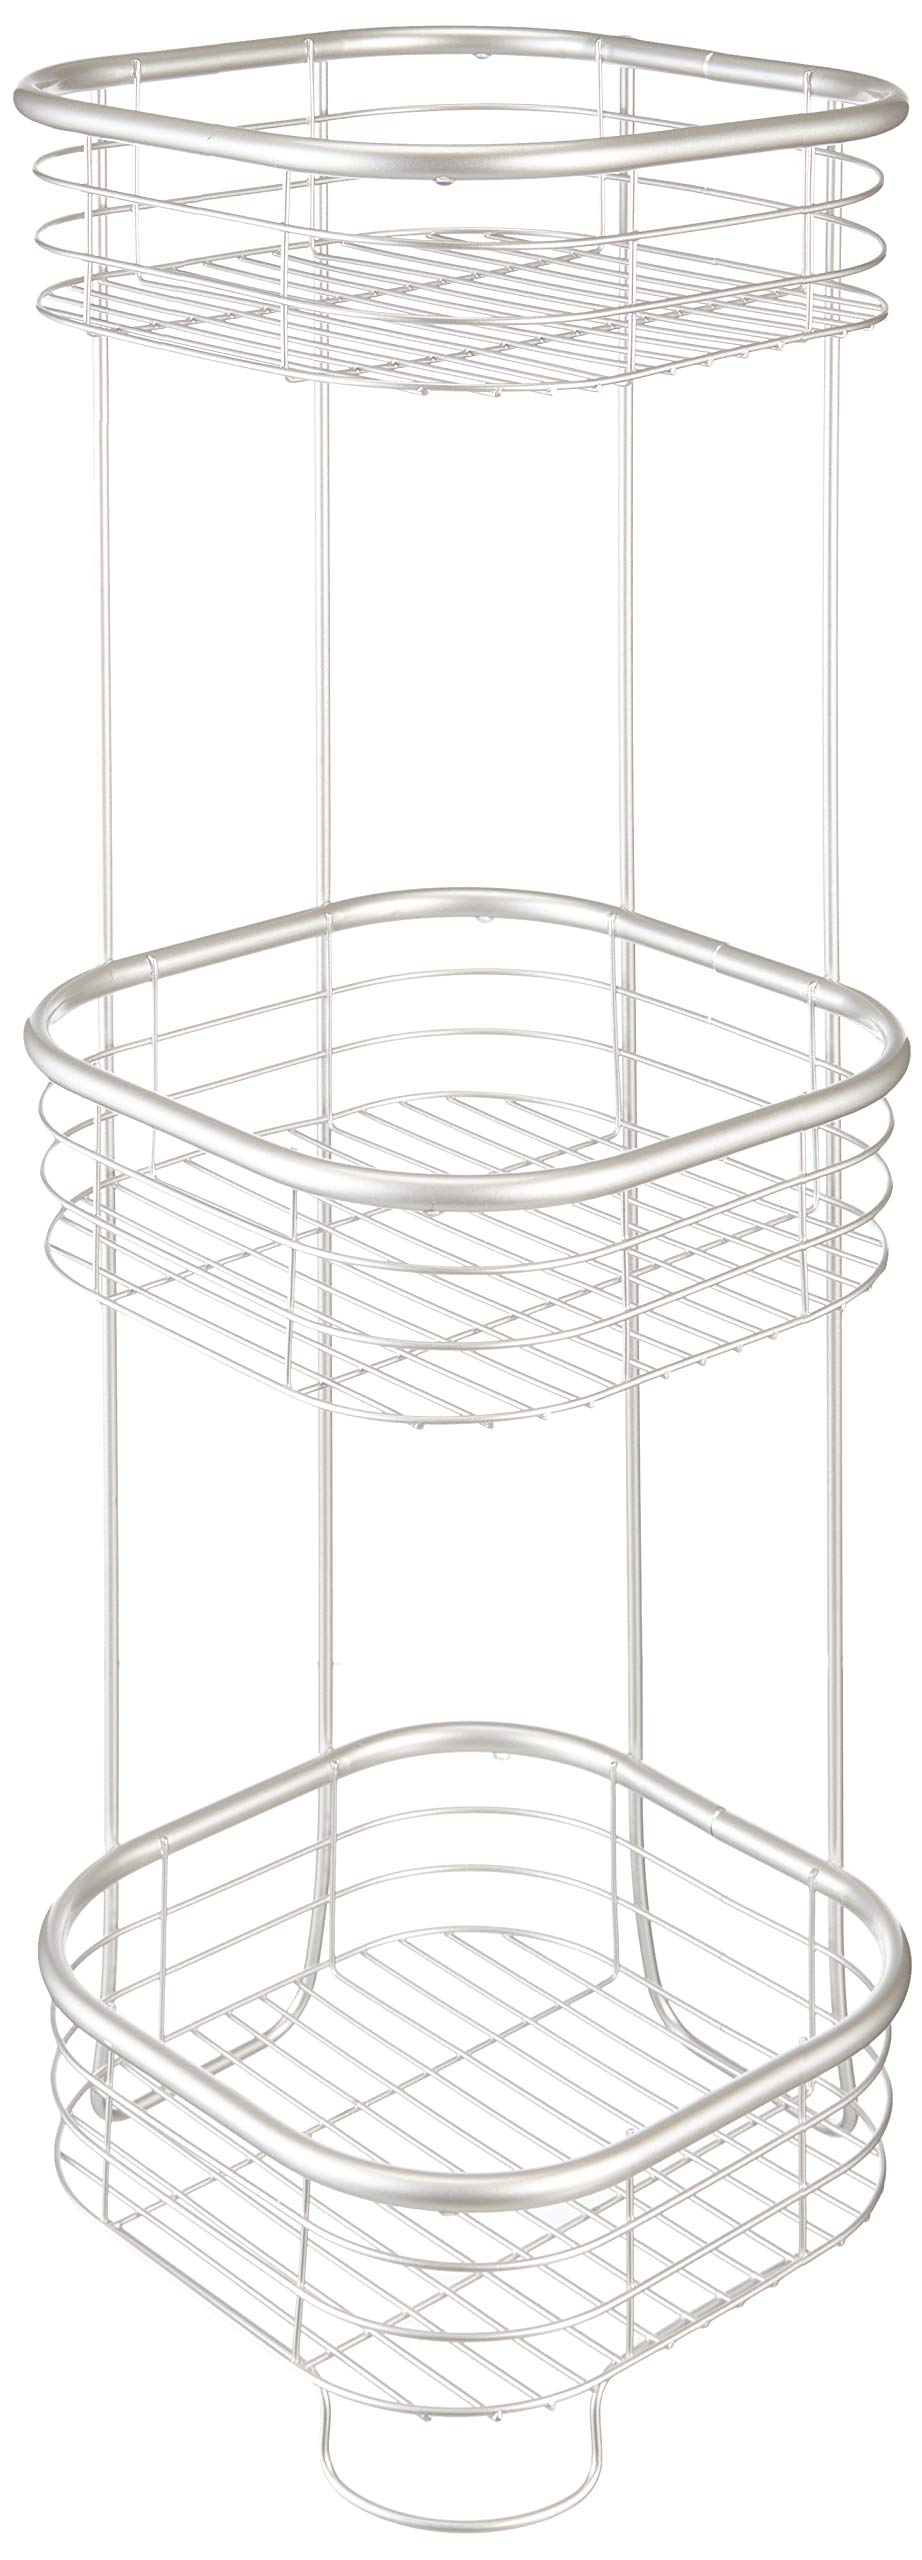 Idesign Standing Shower Caddy Organizer, The Forma Collection - 9.5" X 9.5" X 26.25", Satin Silver